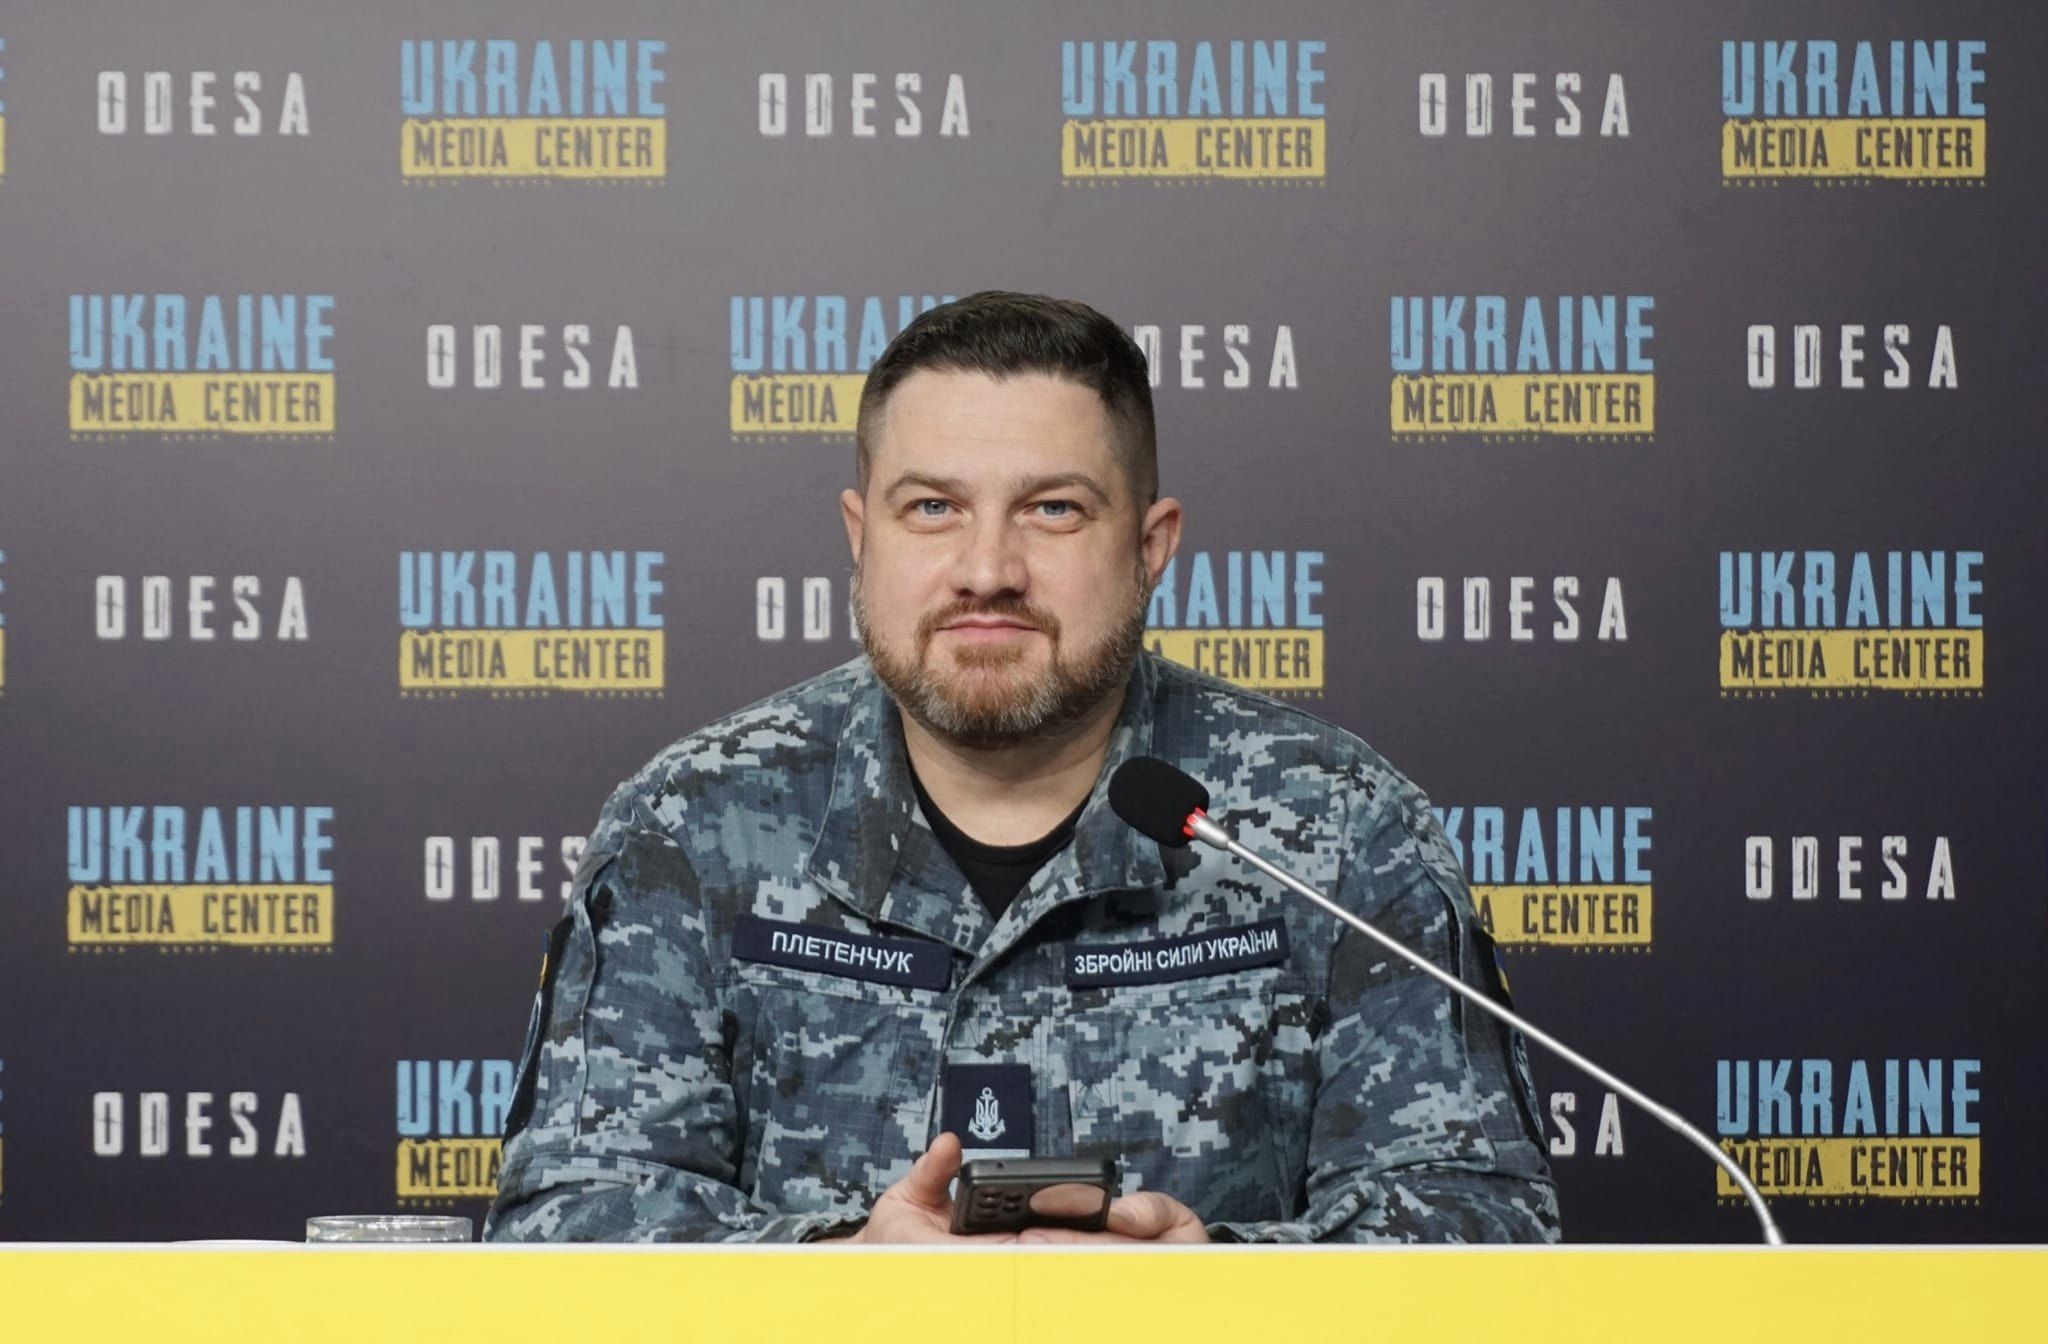 Ukrainian Navy: The destroyed communication node of the Russian Black Sea Fleet was crucial for military command and control